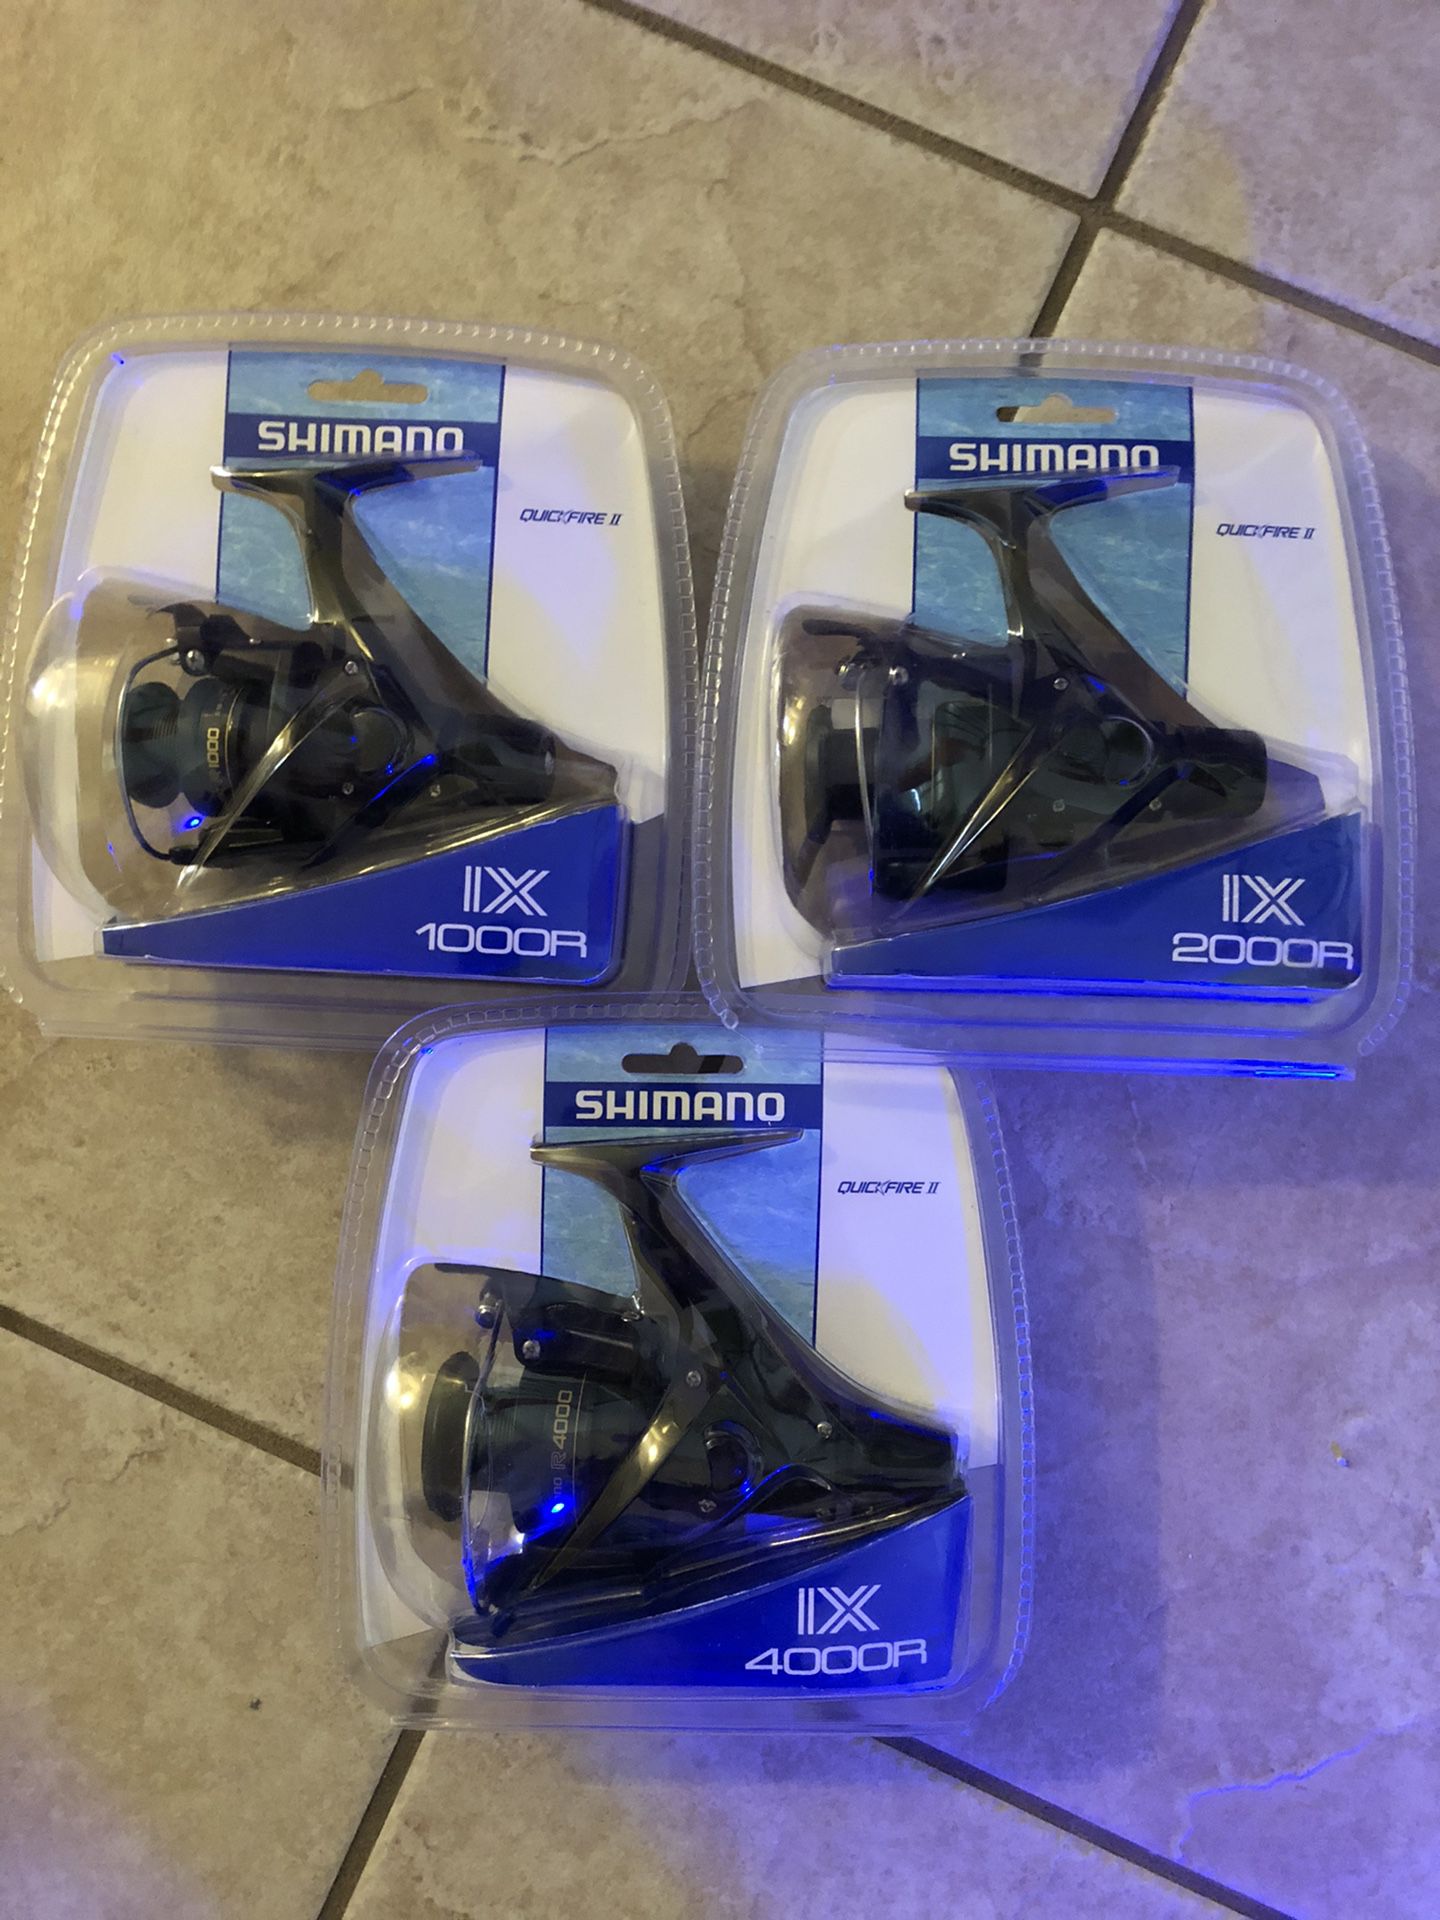 3 brand new and different sizes Shimano spinning fishing reels